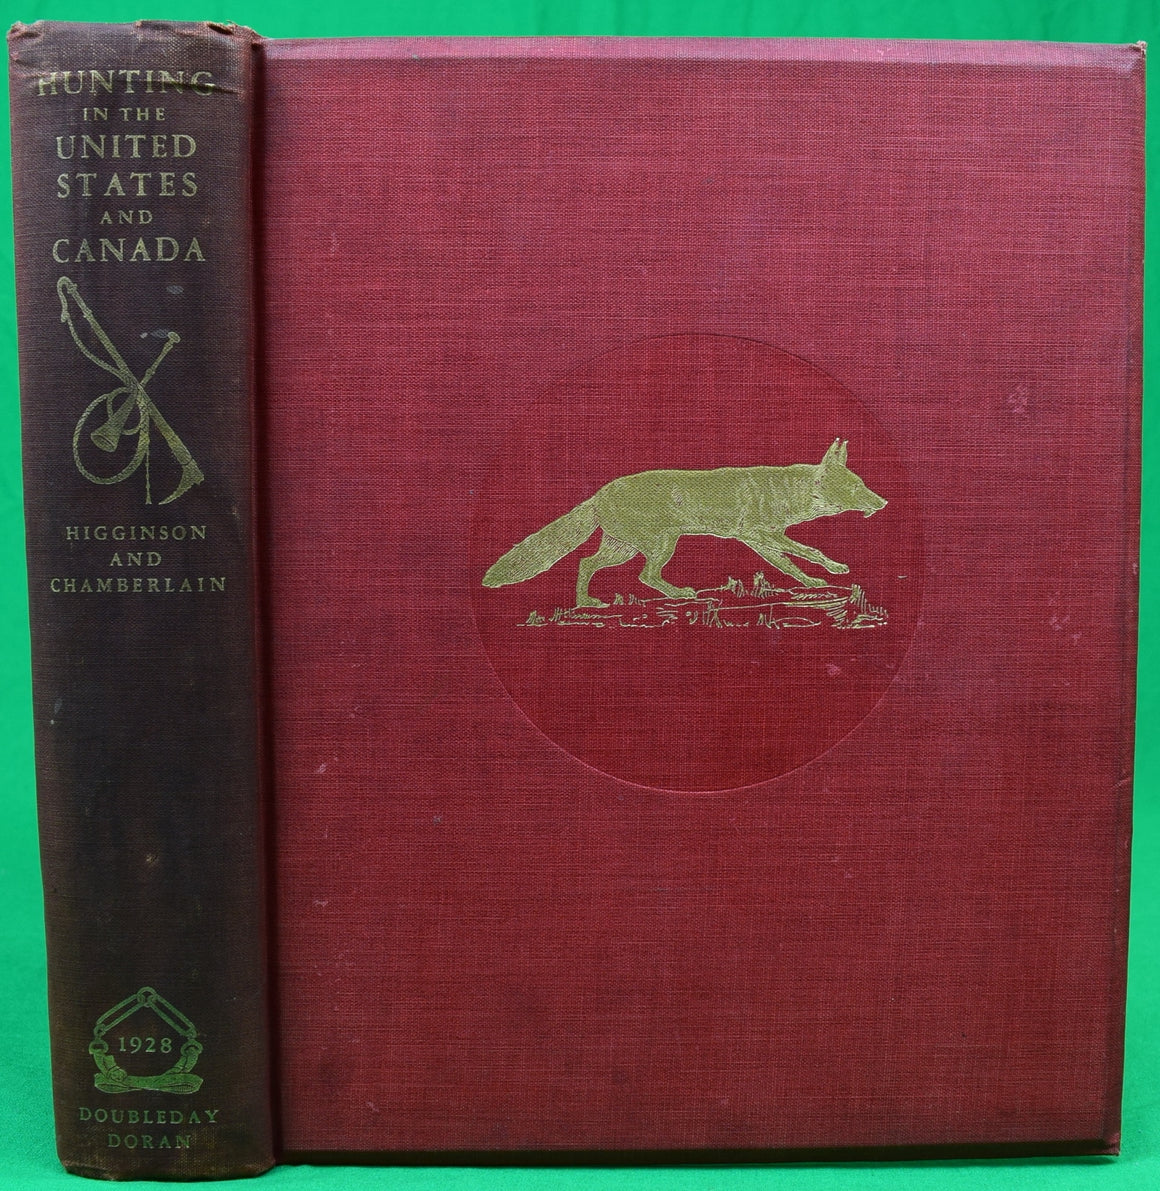 "Hunting In The United States And Canada" 1928 HIGGINSON, A. Henry & CHAMBERLAIN, Julian Ingersoll